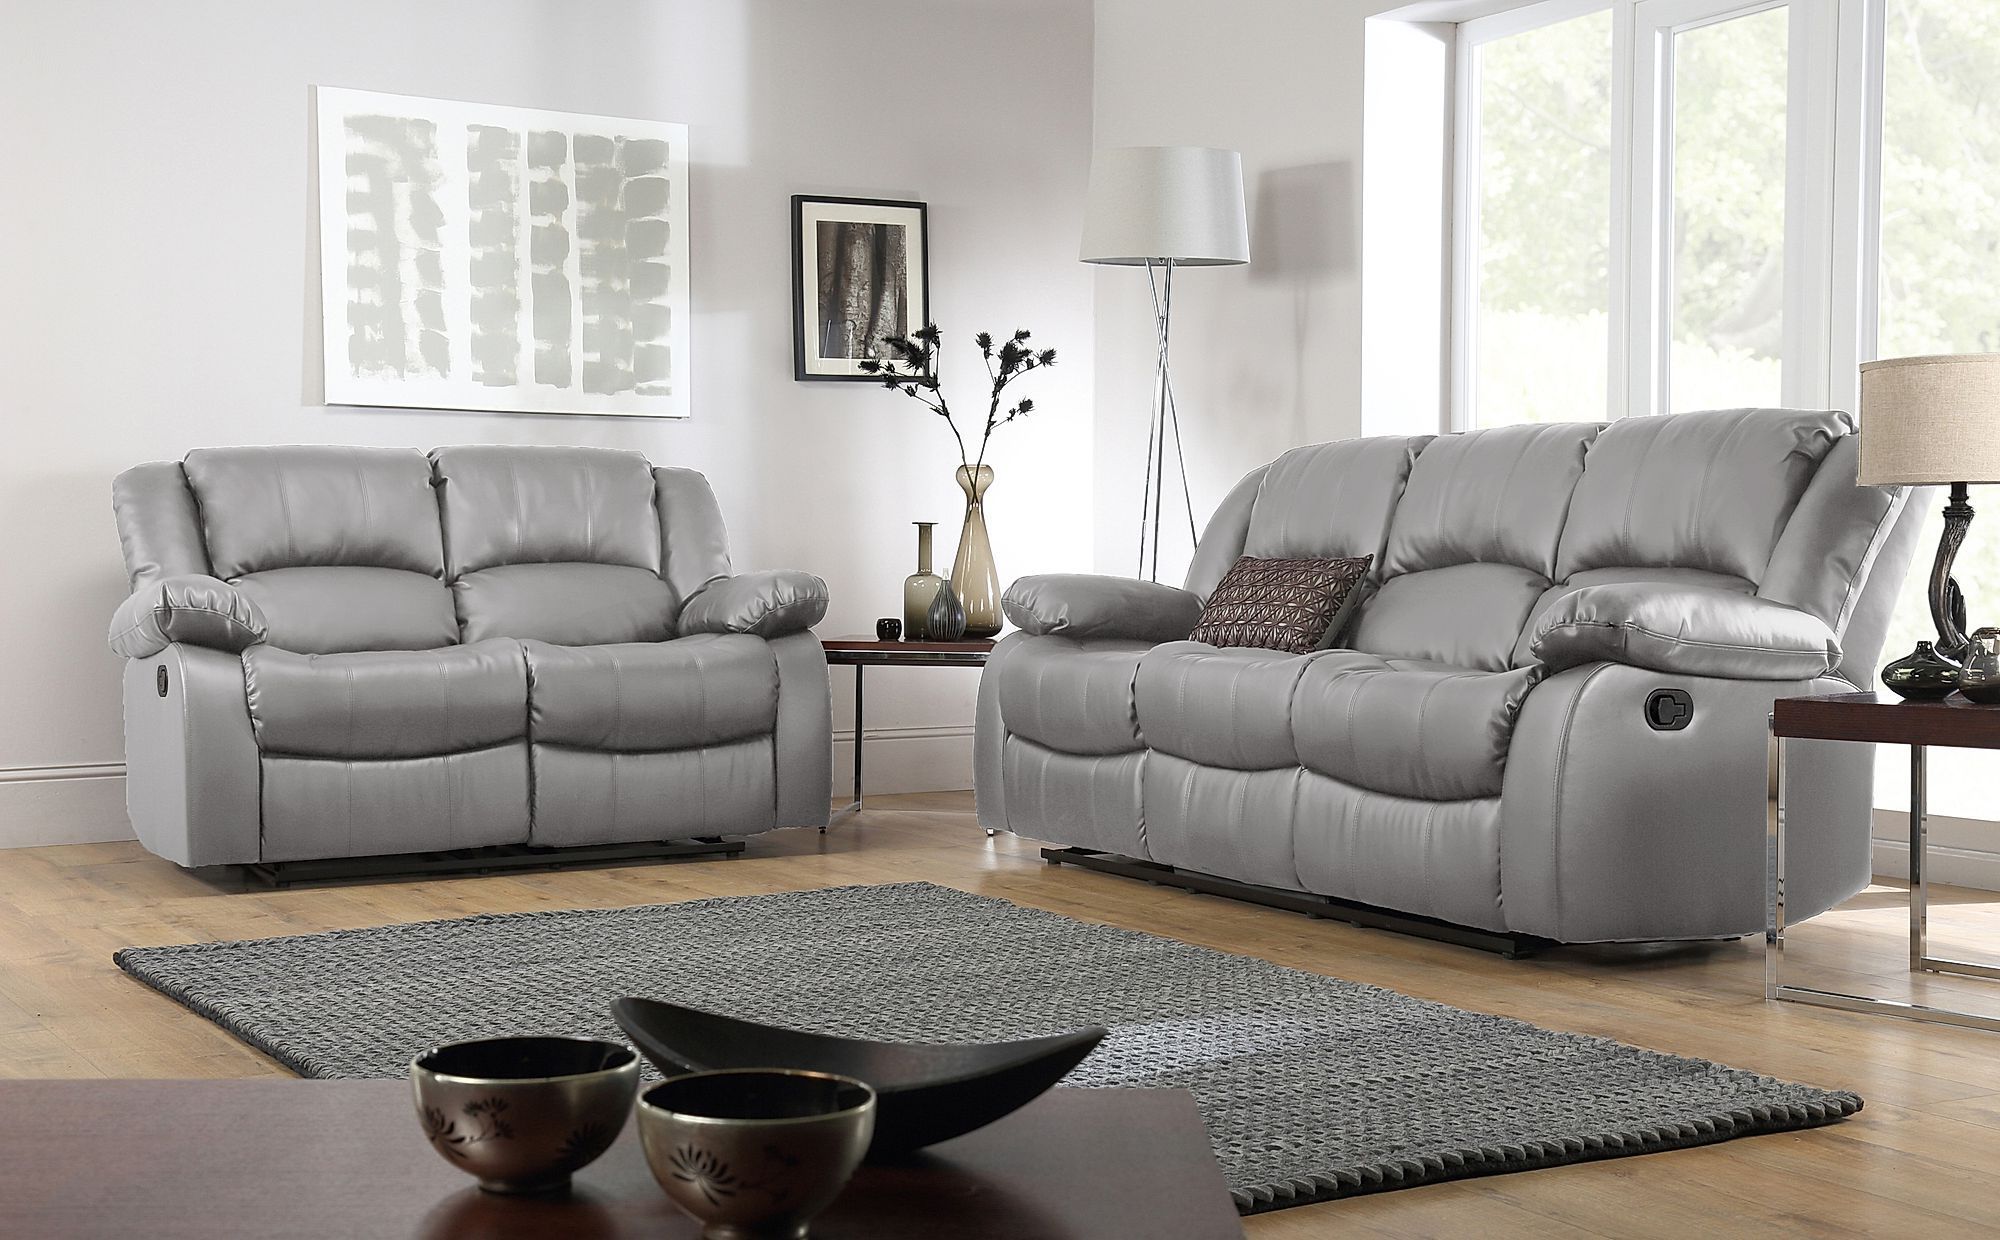 Reclining Sofa With Regard To Most Current Modern Light Grey Loveseat Sofas (View 8 of 15)